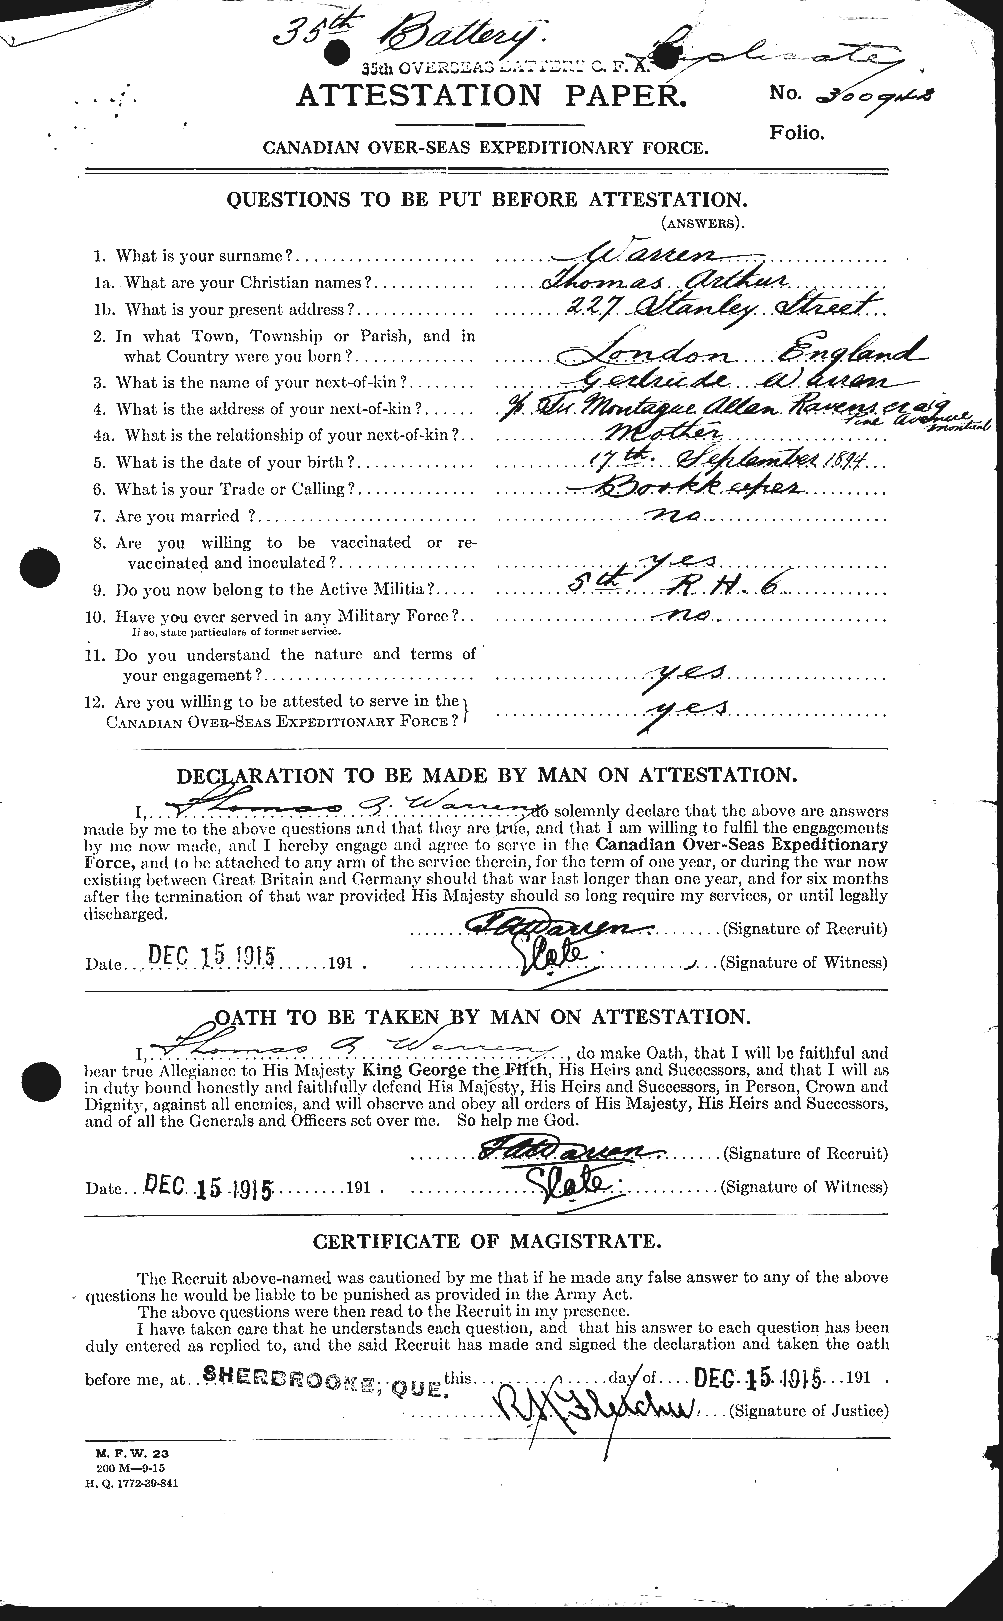 Personnel Records of the First World War - CEF 658643a